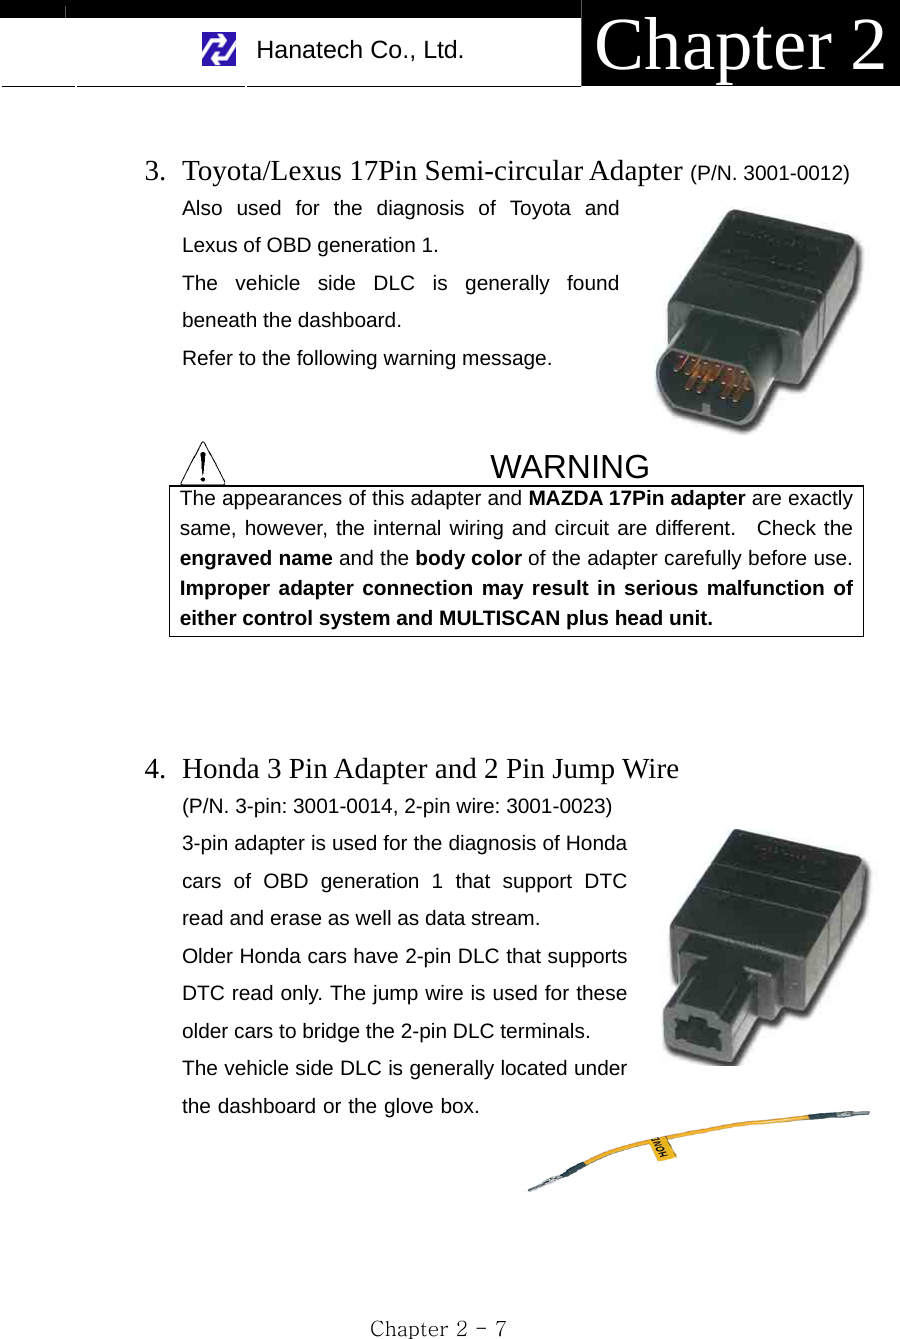     Hanatech Co., Ltd.  Chapter 2 Chapter 2 - 7  3. Toyota/Lexus 17Pin Semi-circular Adapter (P/N. 3001-0012) Also used for the diagnosis of Toyota and Lexus of OBD generation 1. The vehicle side DLC is generally found beneath the dashboard. Refer to the following warning message.     WARNING The appearances of this adapter and MAZDA 17Pin adapter are exactly same, however, the internal wiring and circuit are different.  Check the engraved name and the body color of the adapter carefully before use. Improper adapter connection may result in serious malfunction of either control system and MULTISCAN plus head unit.    4. Honda 3 Pin Adapter and 2 Pin Jump Wire   (P/N. 3-pin: 3001-0014, 2-pin wire: 3001-0023) 3-pin adapter is used for the diagnosis of Honda cars of OBD generation 1 that support DTC read and erase as well as data stream. Older Honda cars have 2-pin DLC that supports DTC read only. The jump wire is used for these older cars to bridge the 2-pin DLC terminals. The vehicle side DLC is generally located under the dashboard or the glove box.        